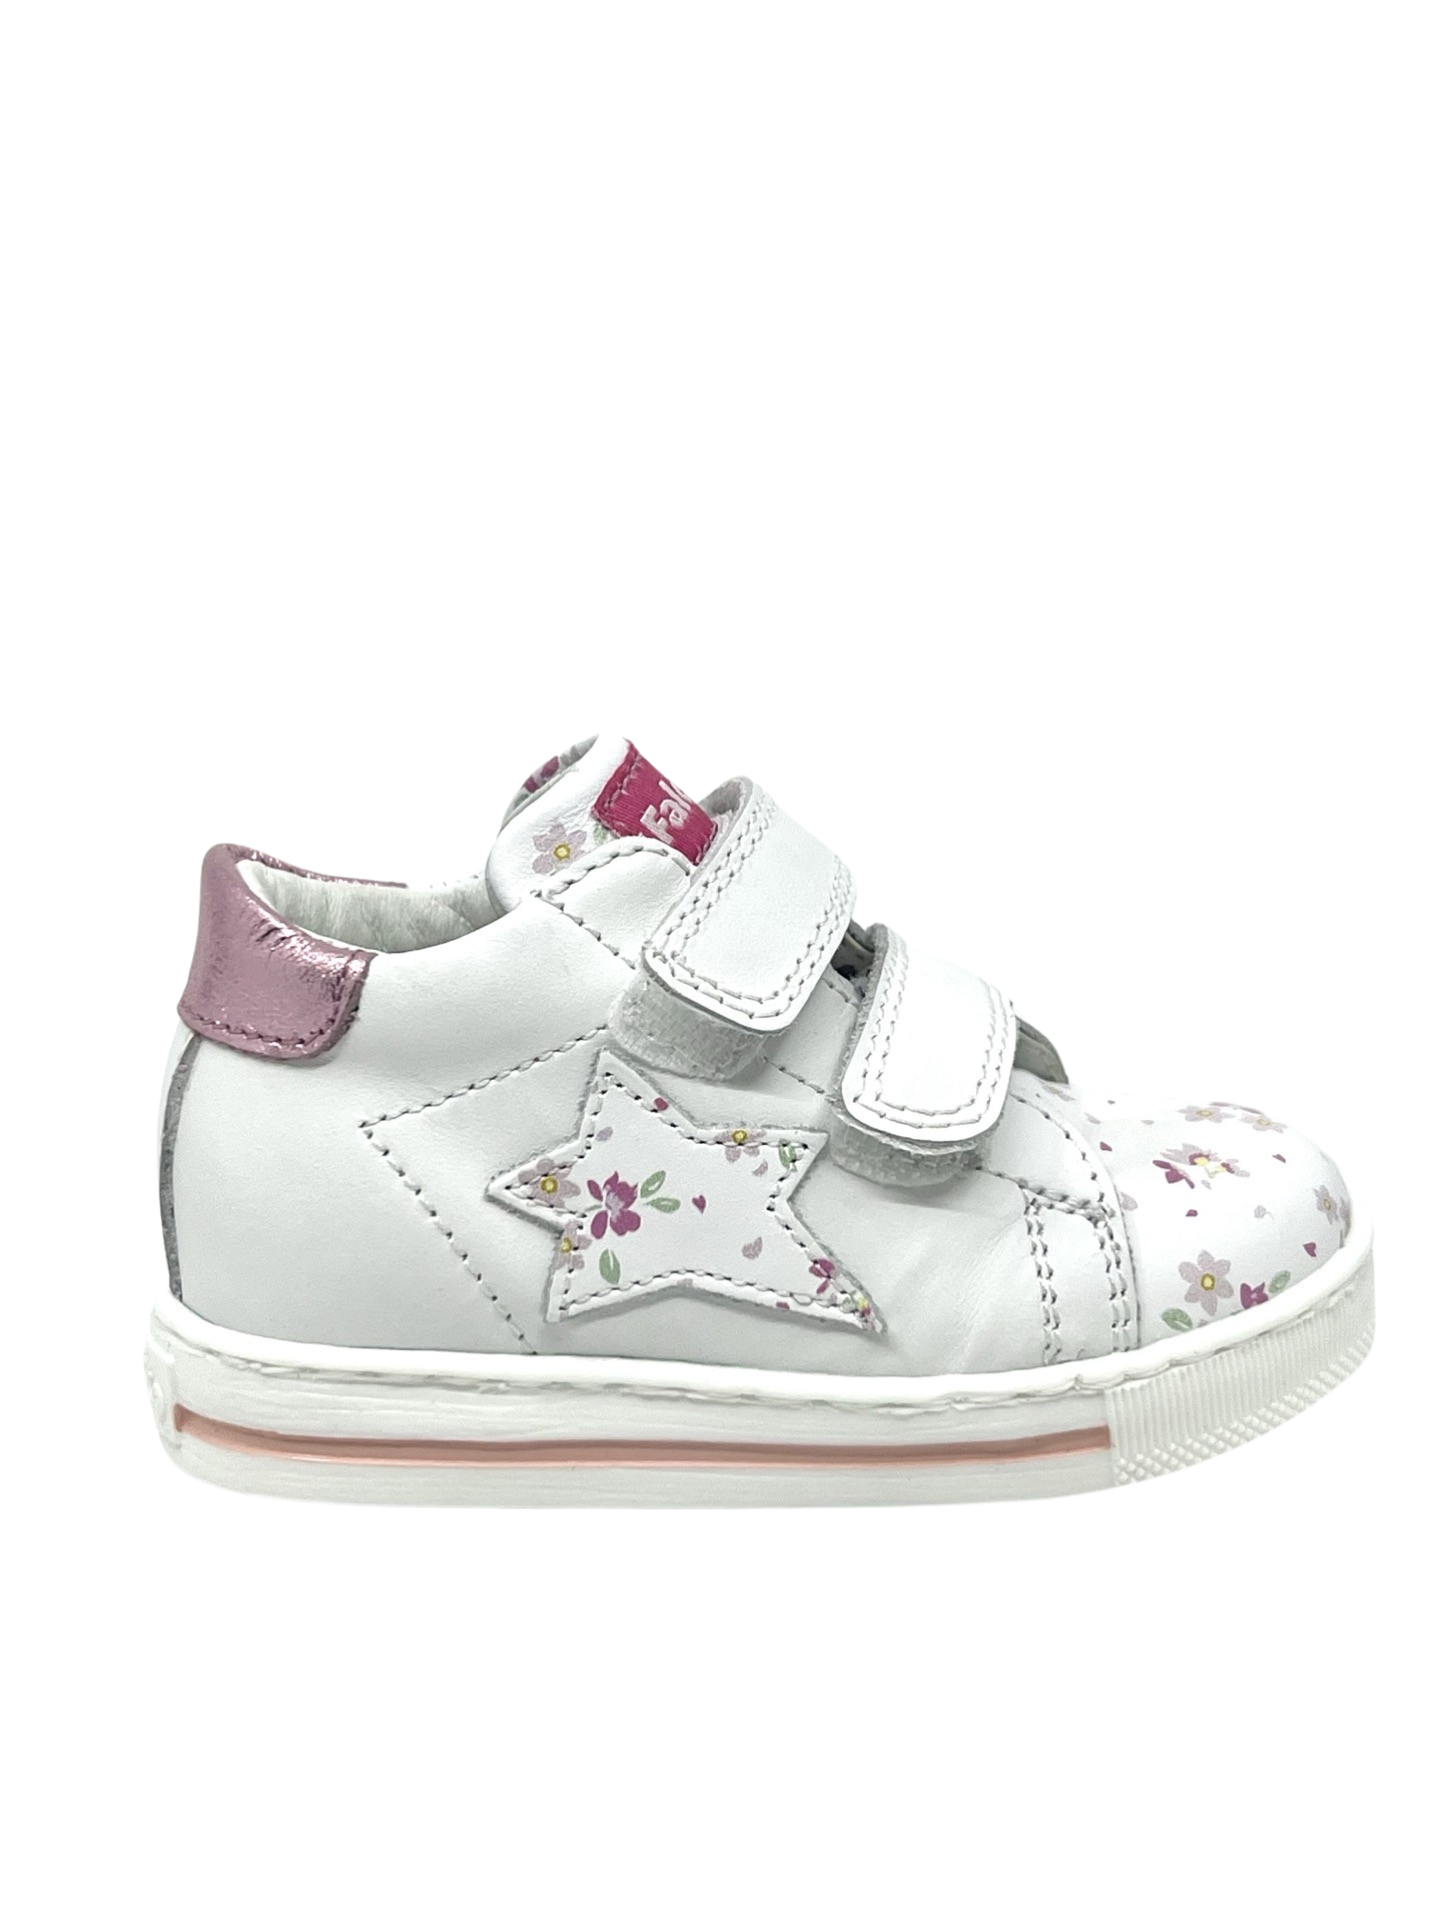 Falcotto White Double Velcro Sneaker with Pink Flowers Star - Sasha